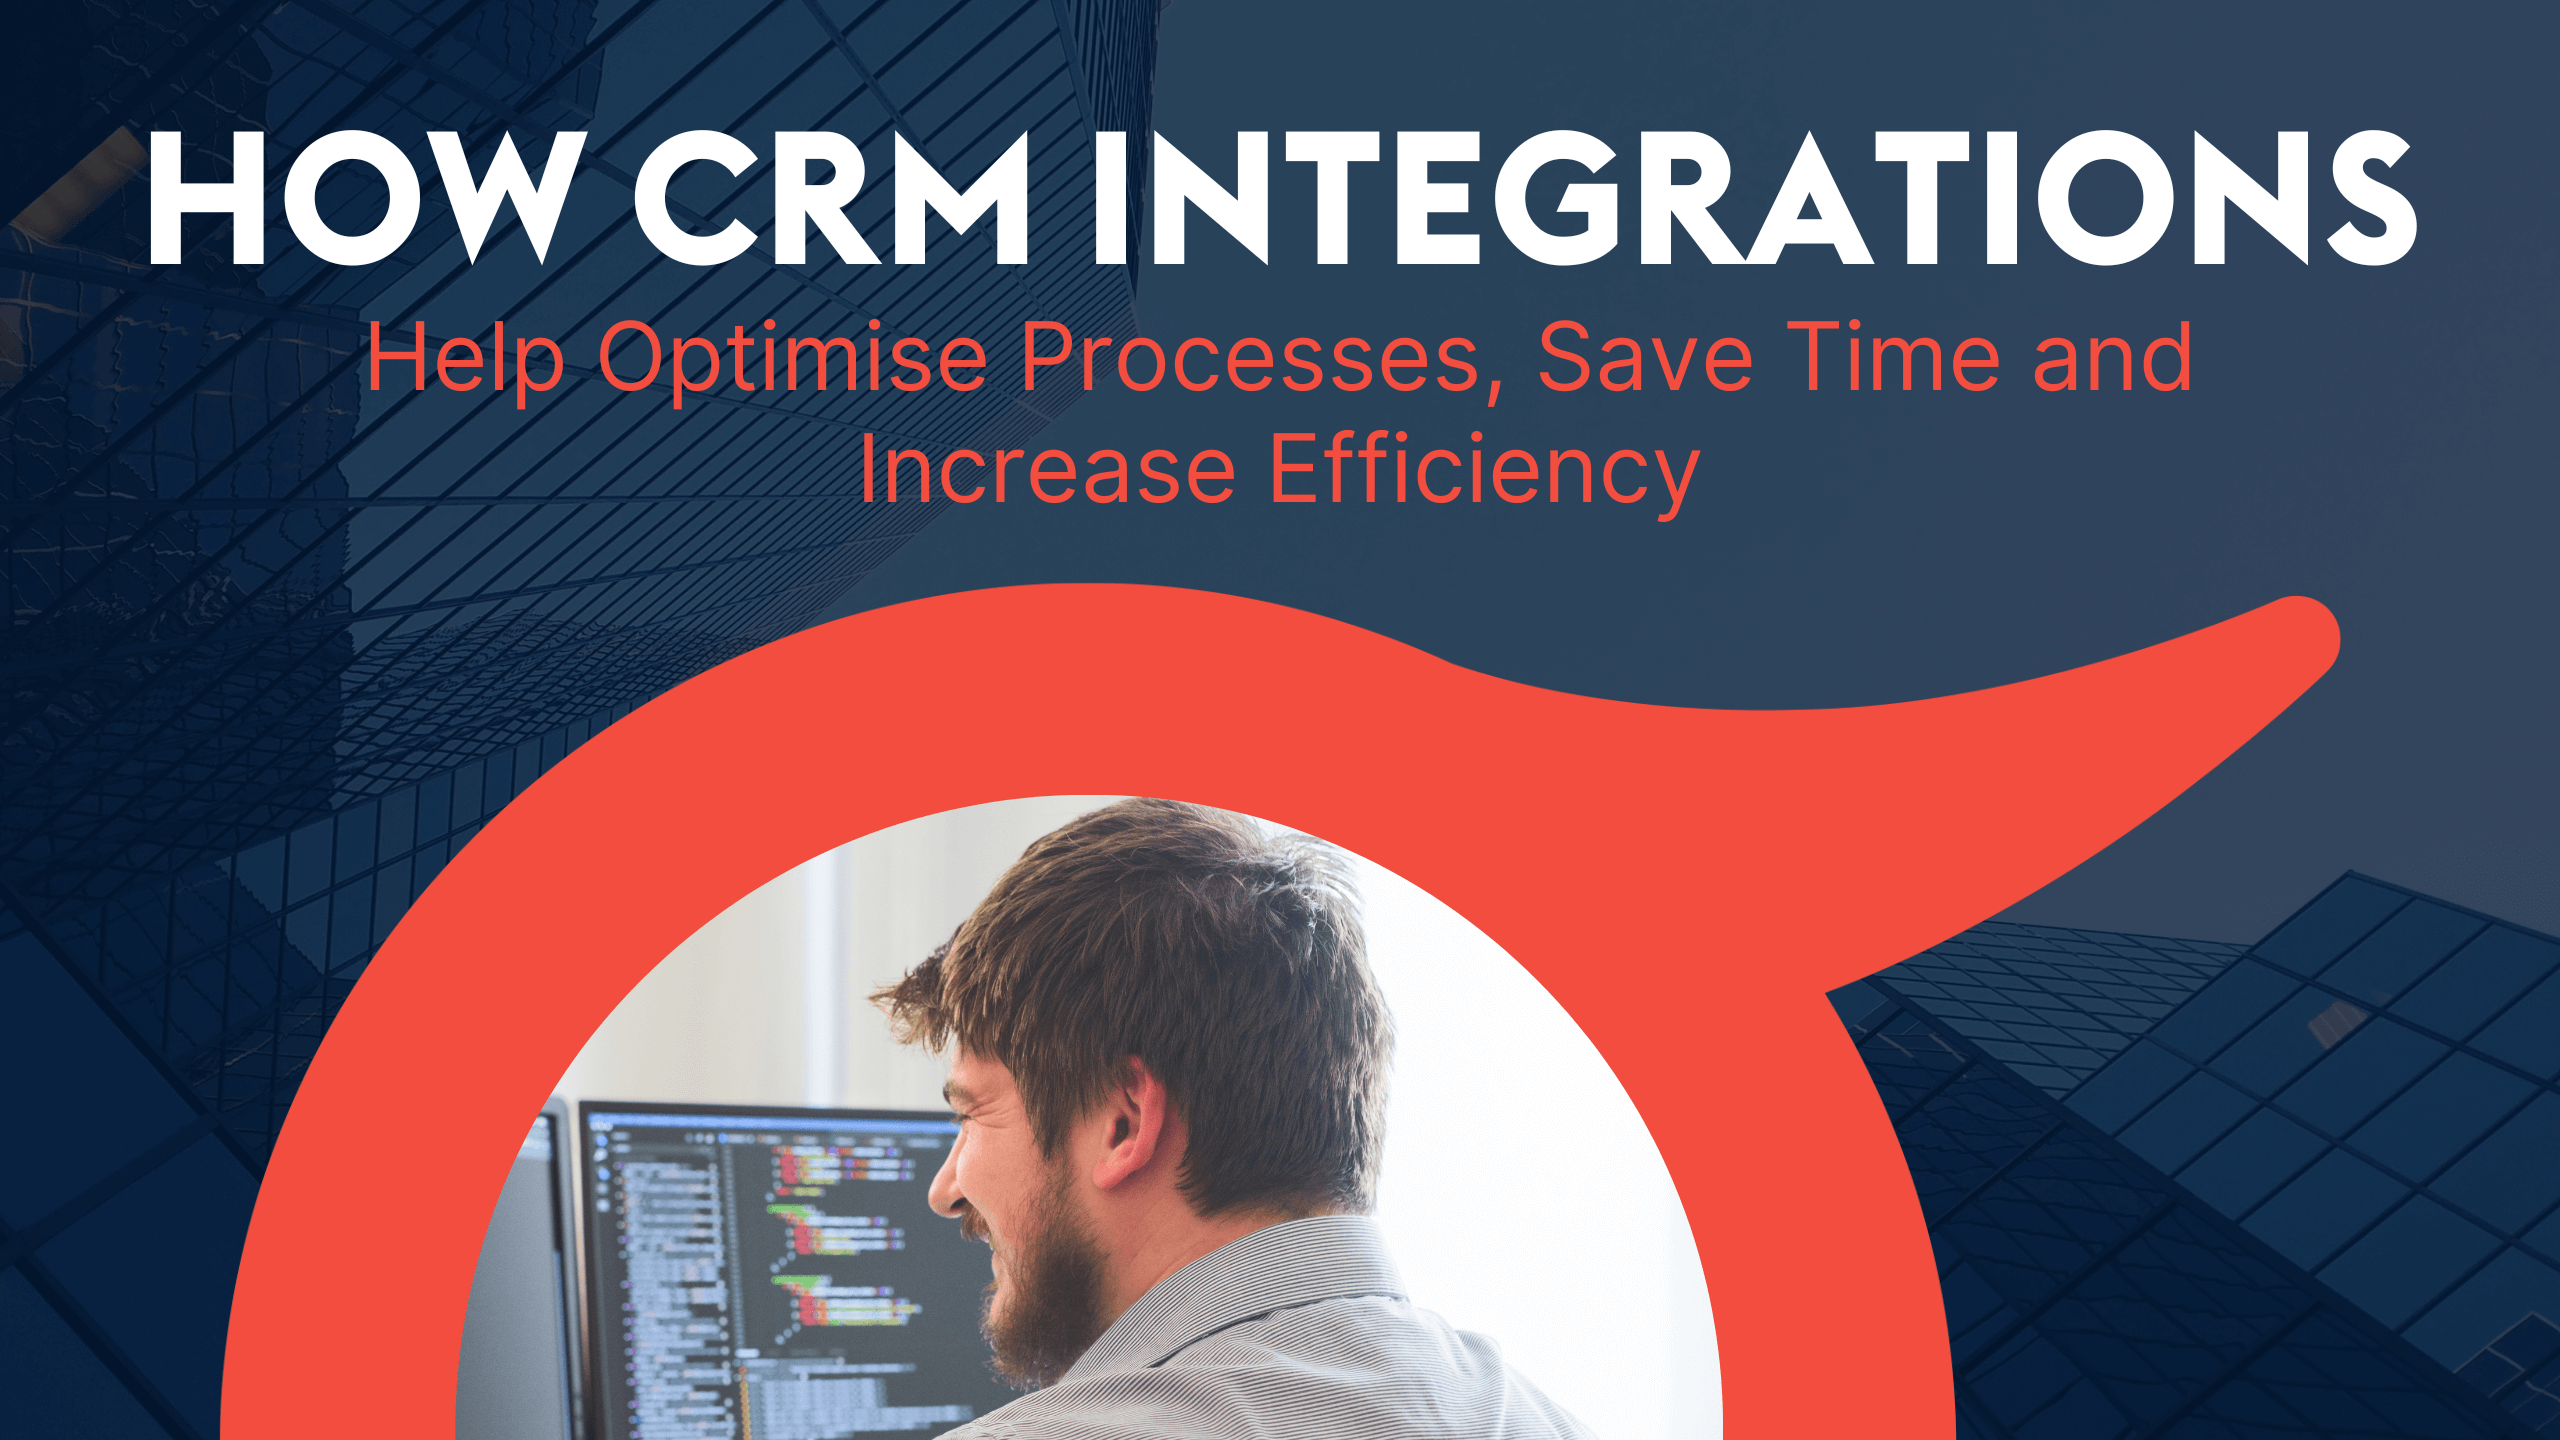 ProvidentCRM-How-CRM-Integrations-Help-Optimise-Processes-Save-Time-Increase-Efficiency